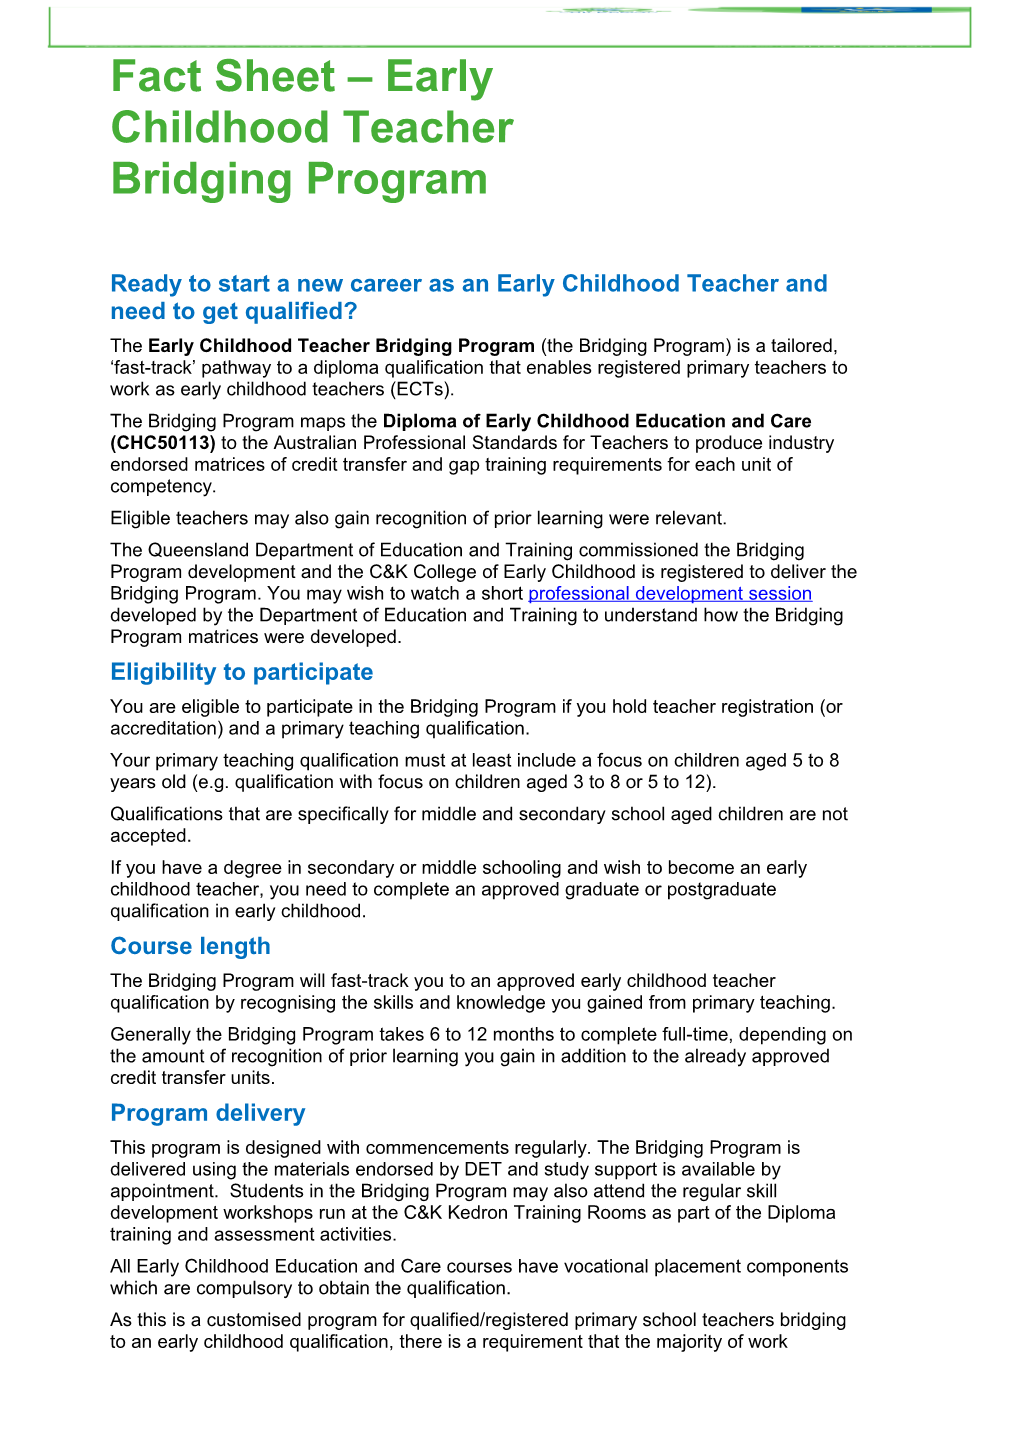 Ready to Start a New Career As an Early Childhood Teacher and Need to Get Qualified?